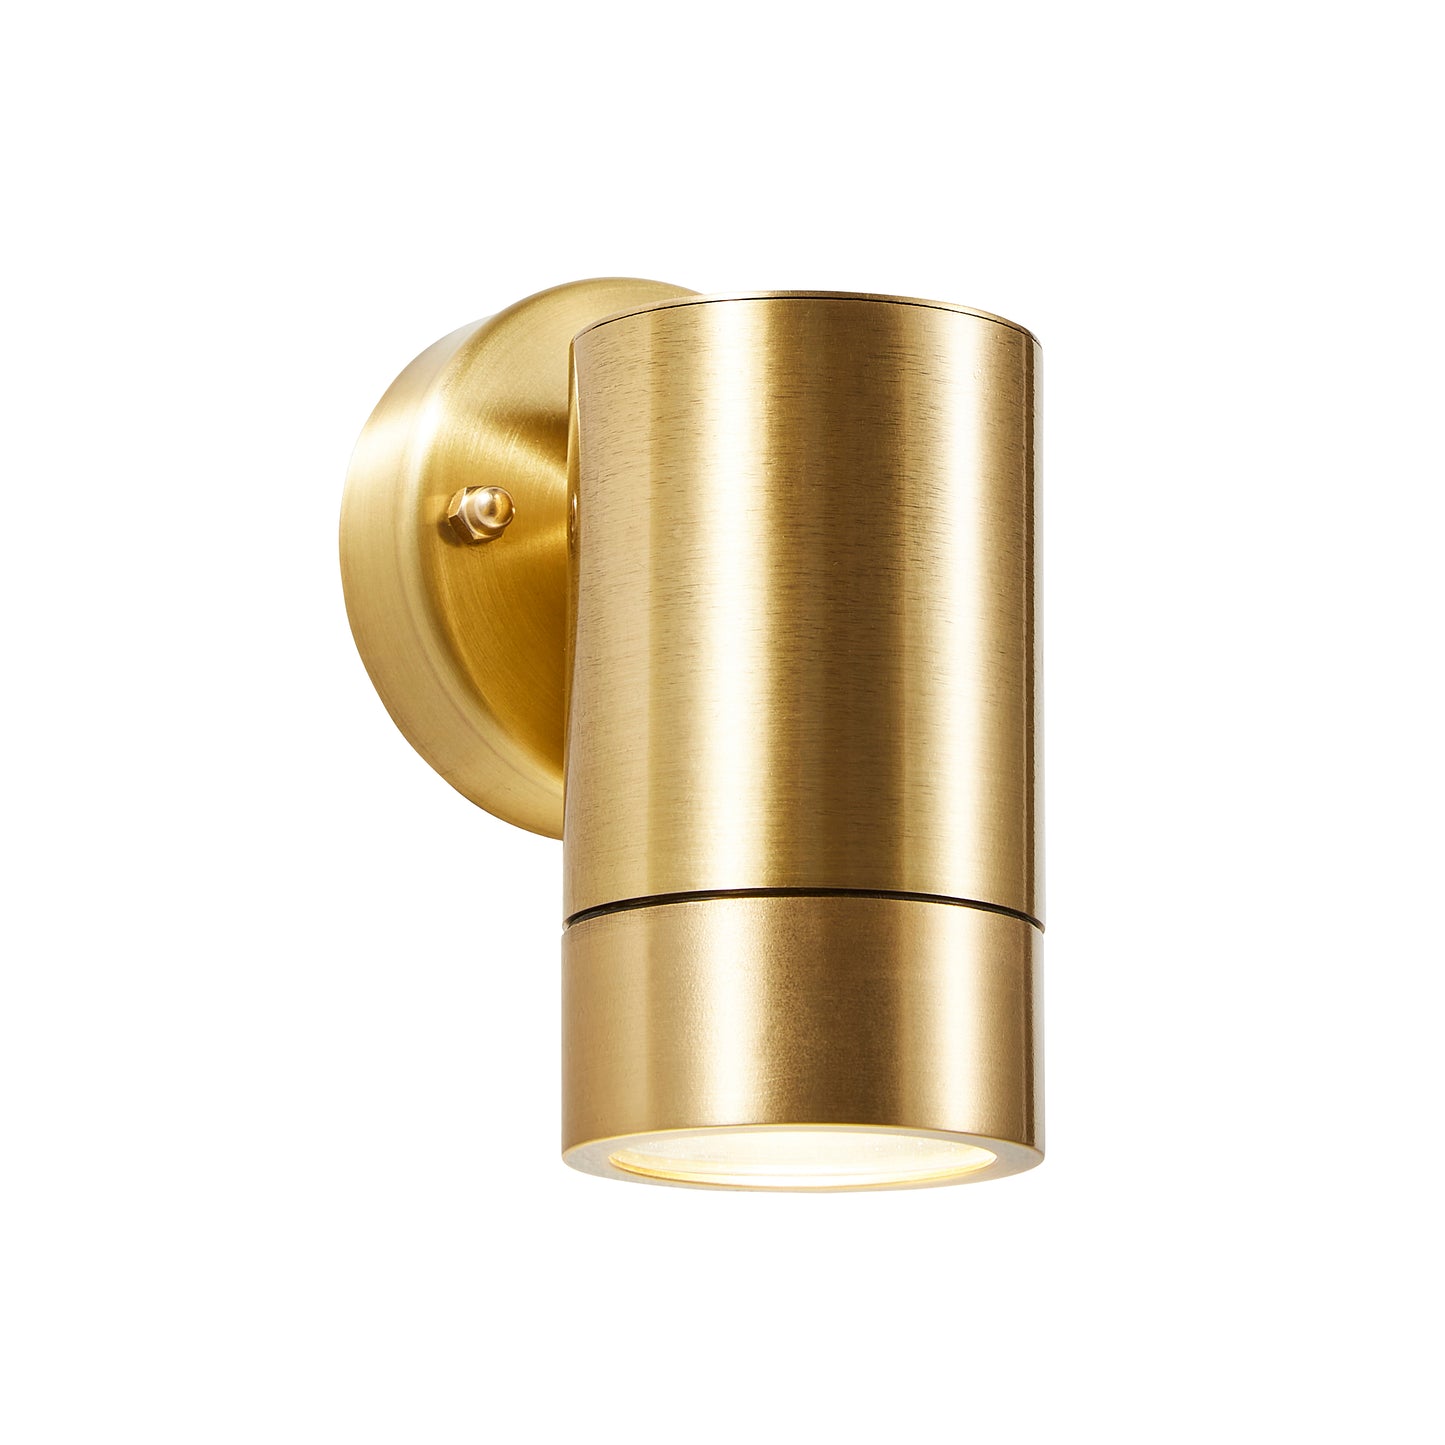 Our Noah brass outdoor wall mounted single cylinder outdoor light would look perfect in a modern or more traditional home design. Outside wall lights can provide atmospheric light in your garden, at the front door or on the terrace as well as a great security solution. It is designed for durability and longevity with its robust material producing a fully weatherproof and water-resistant light fitting. Use LED bulbs to make this light energy efficient and low cost to run.